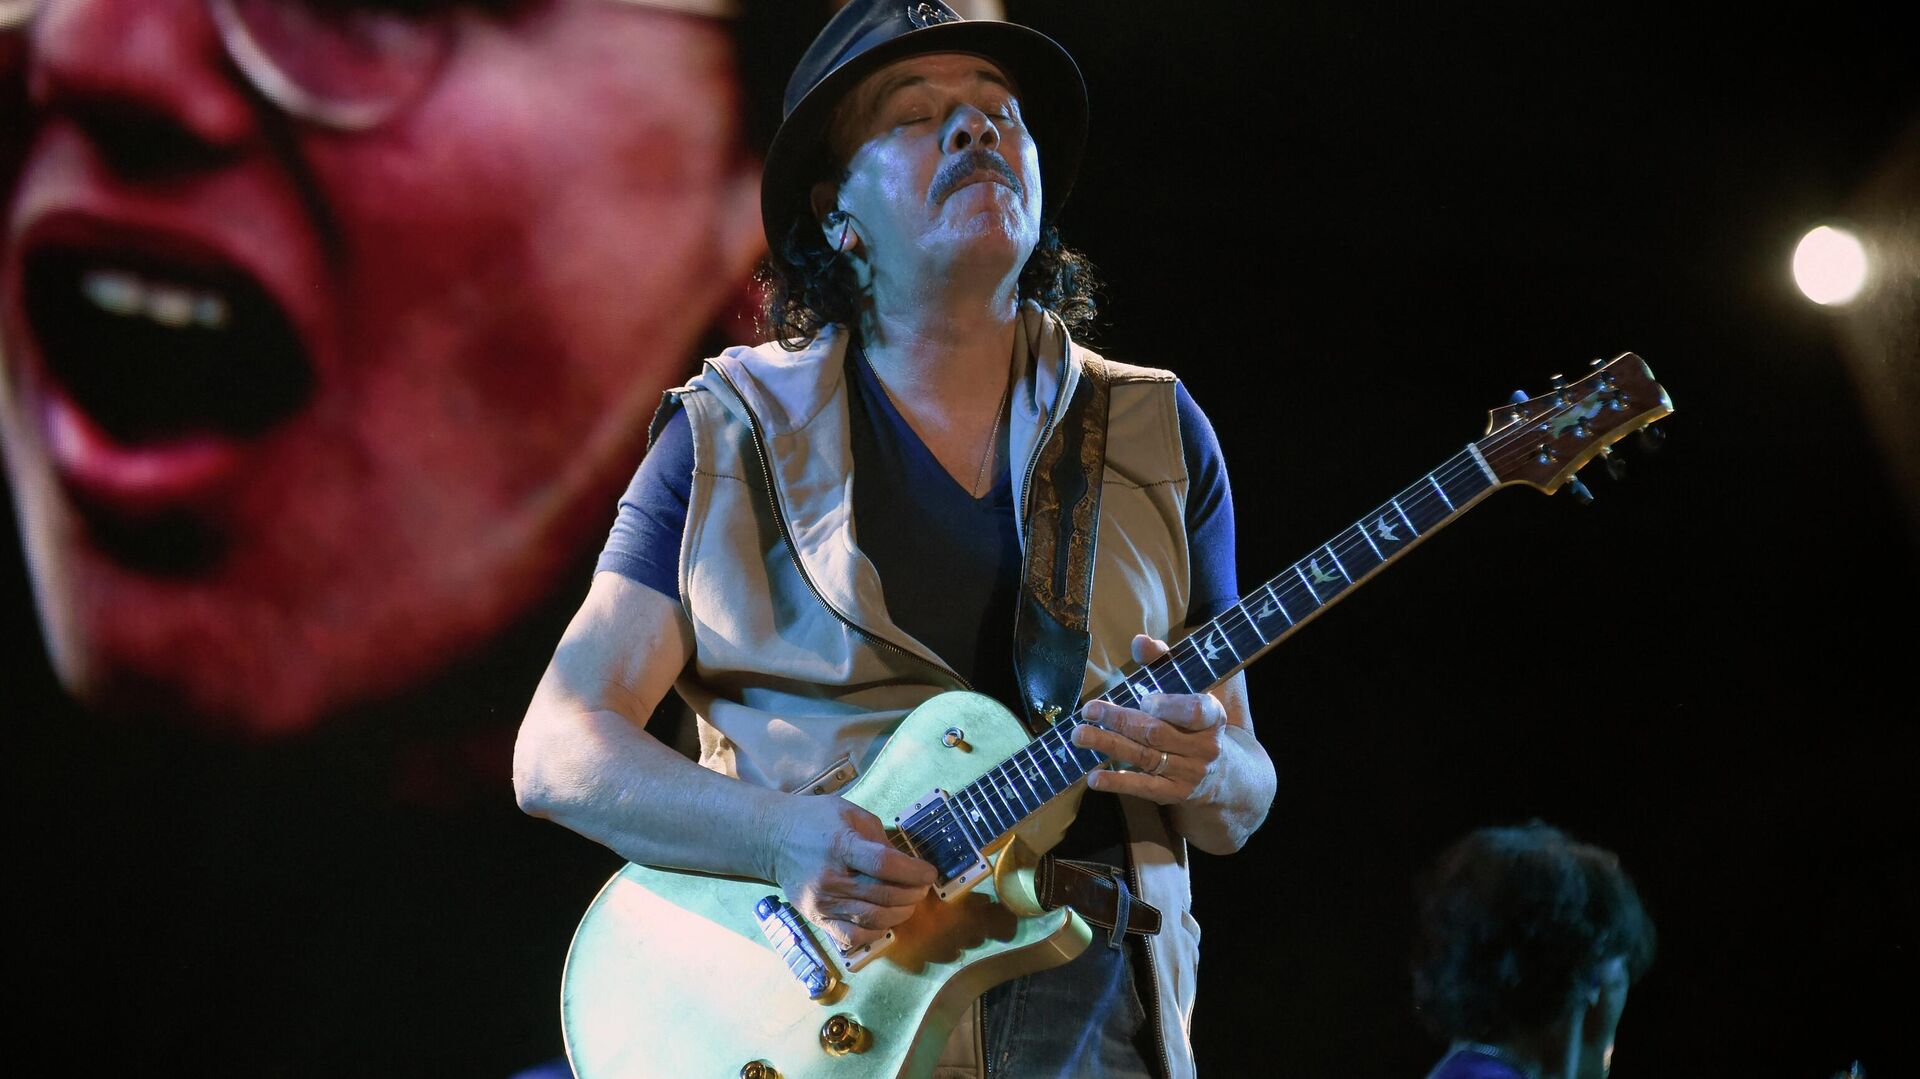 Mexican born guitar player Carlos Santana performs during the second day of the Vive Latino music festival in Mexico City on March 17, 2019 - Sputnik International, 1920, 06.07.2022